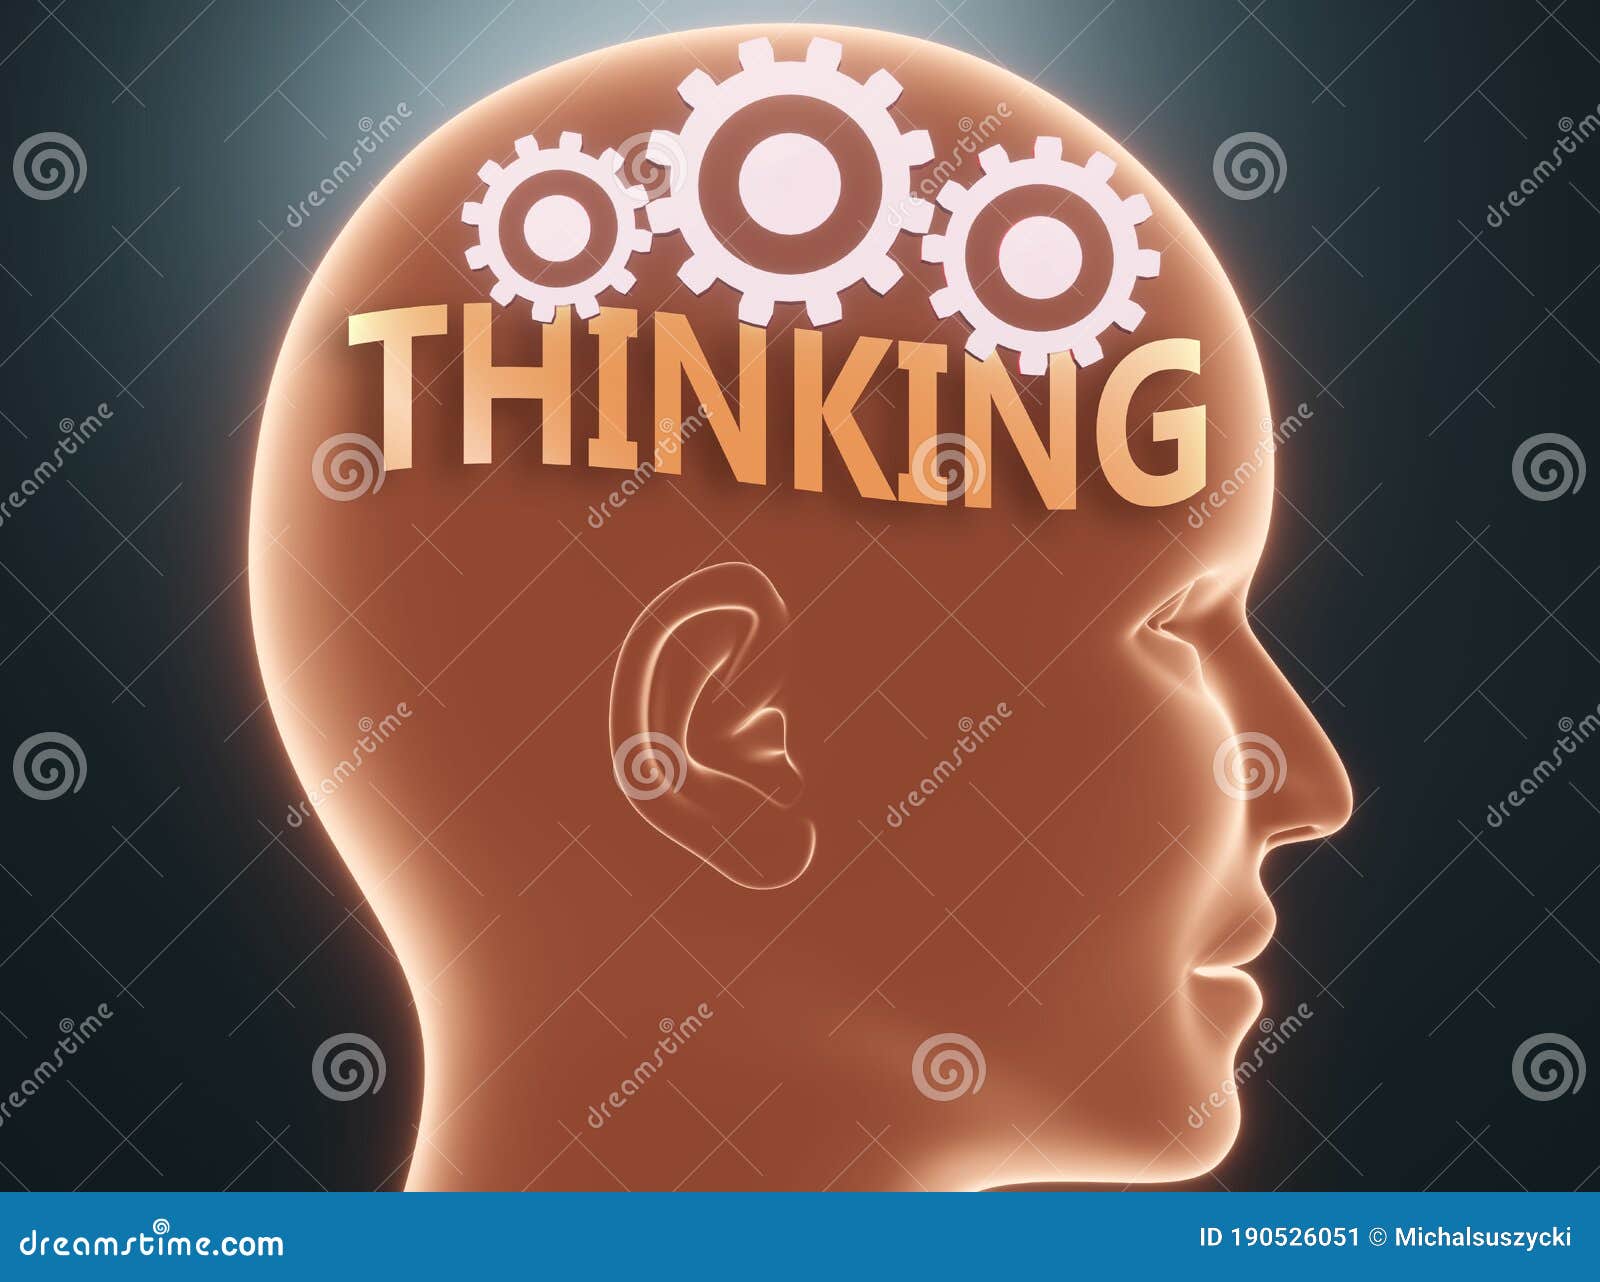 Thinking Inside Human Head Different Geometric Abstract Design Icons ...